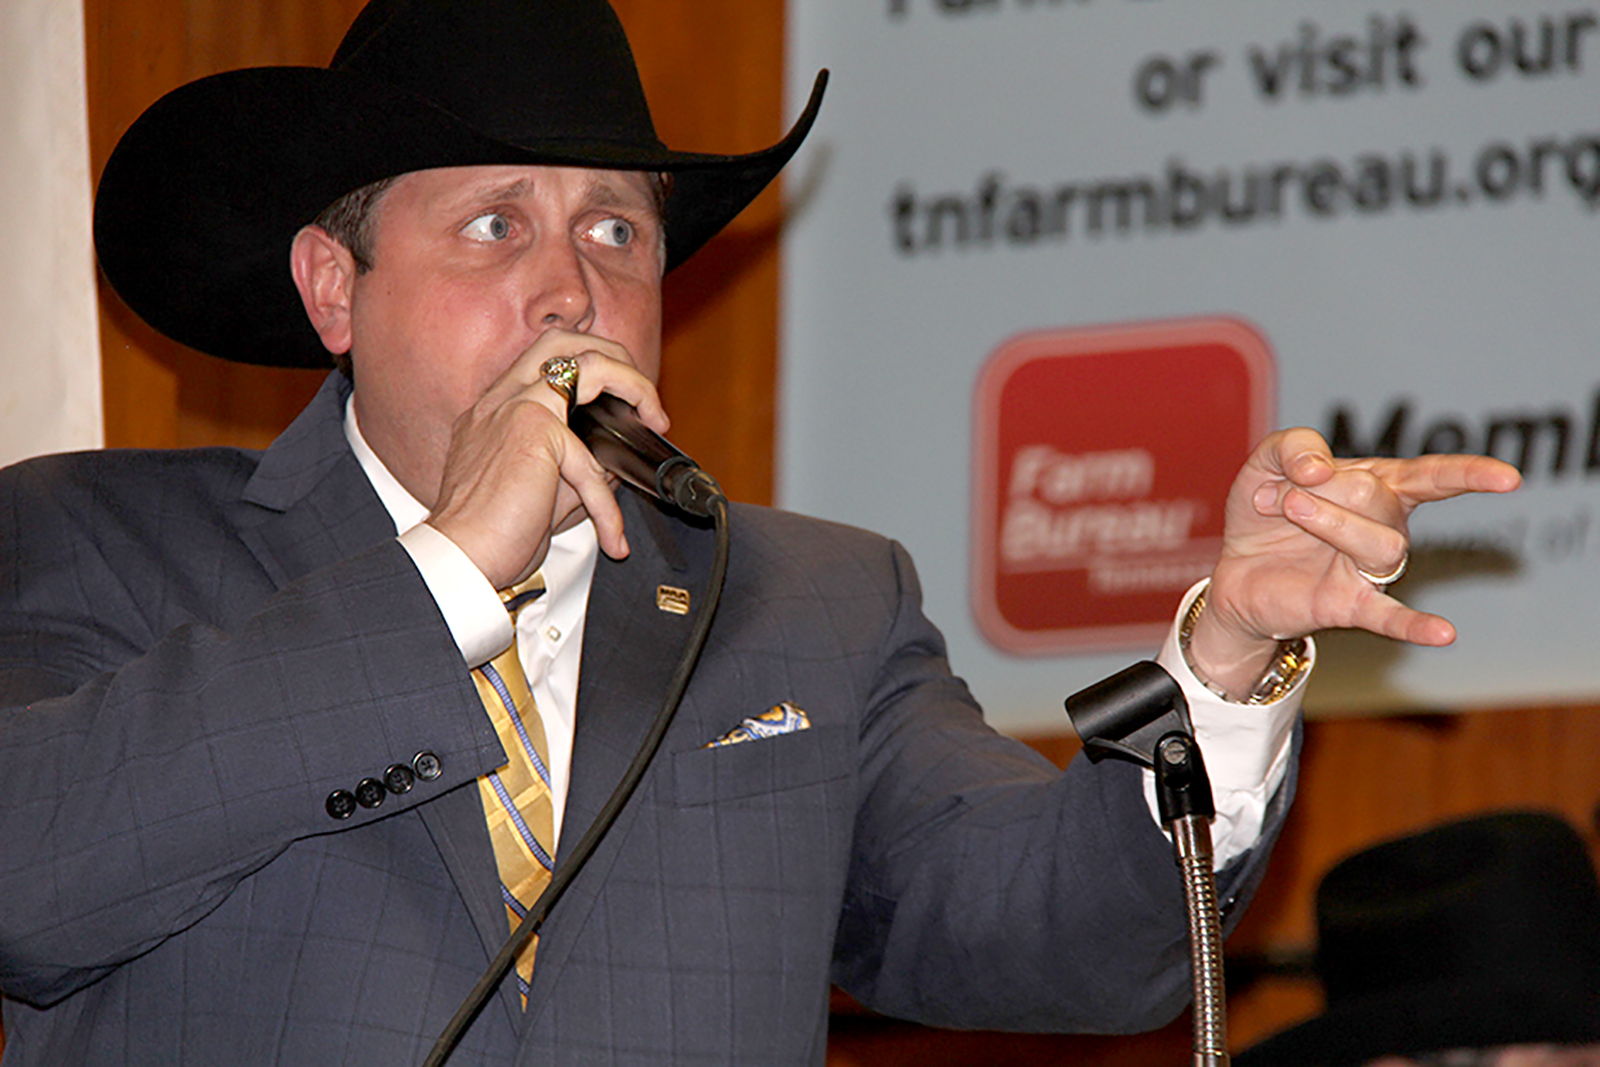 Auctioneering man in a grey suit and black cowboy hat speaking into a handheld microphone and pointing to the right of the frame.